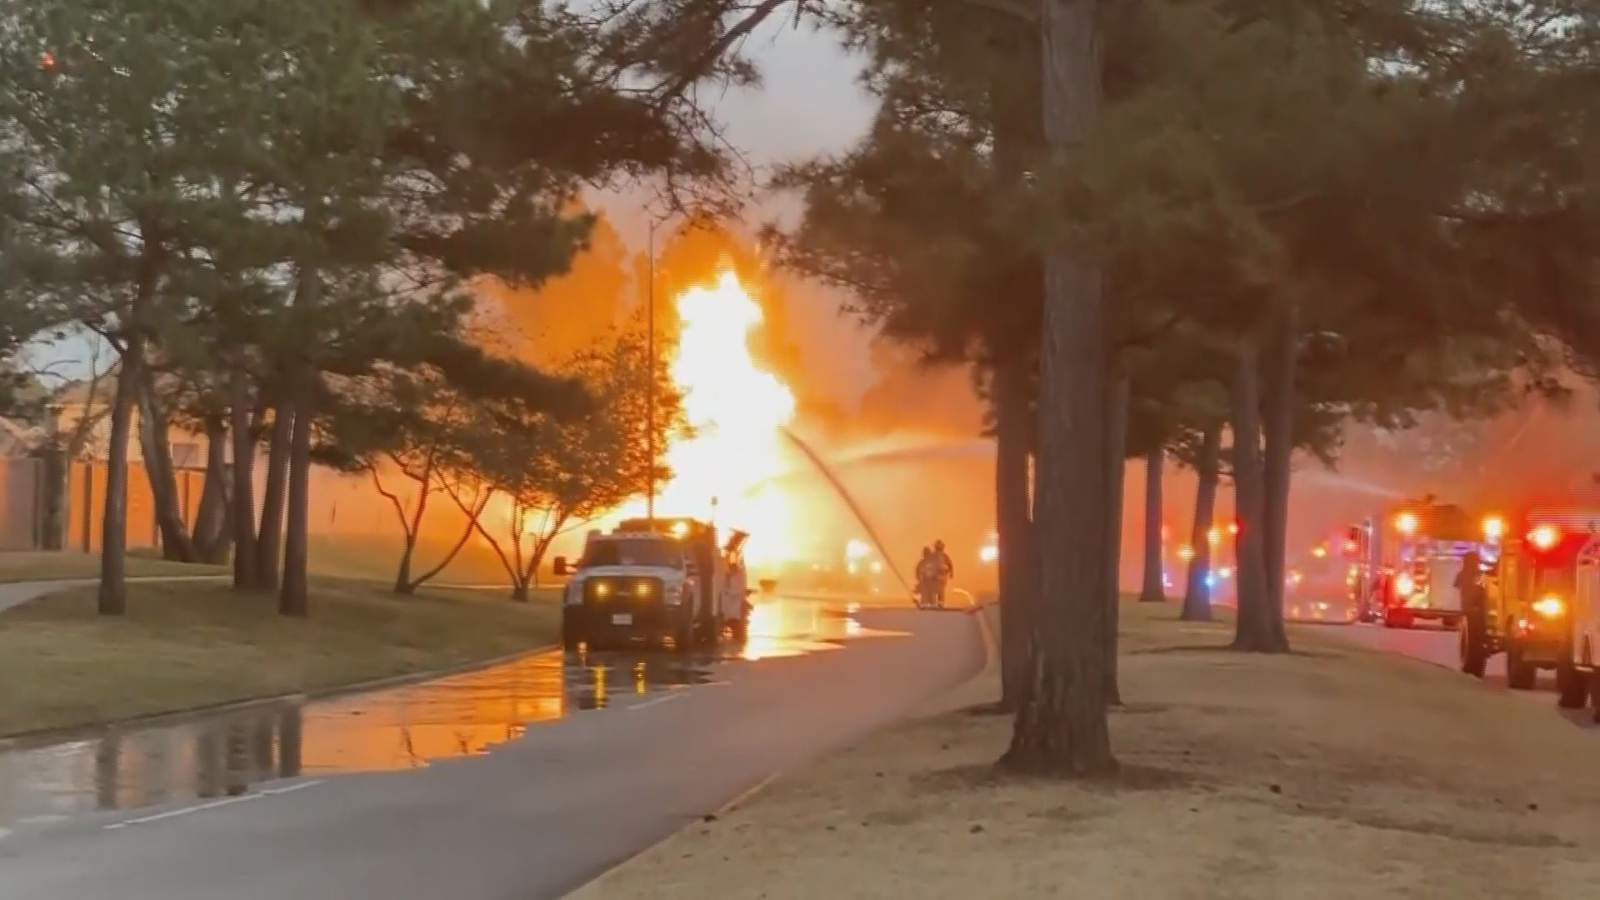 Several people injured in natural gas explosion, fire near Klein